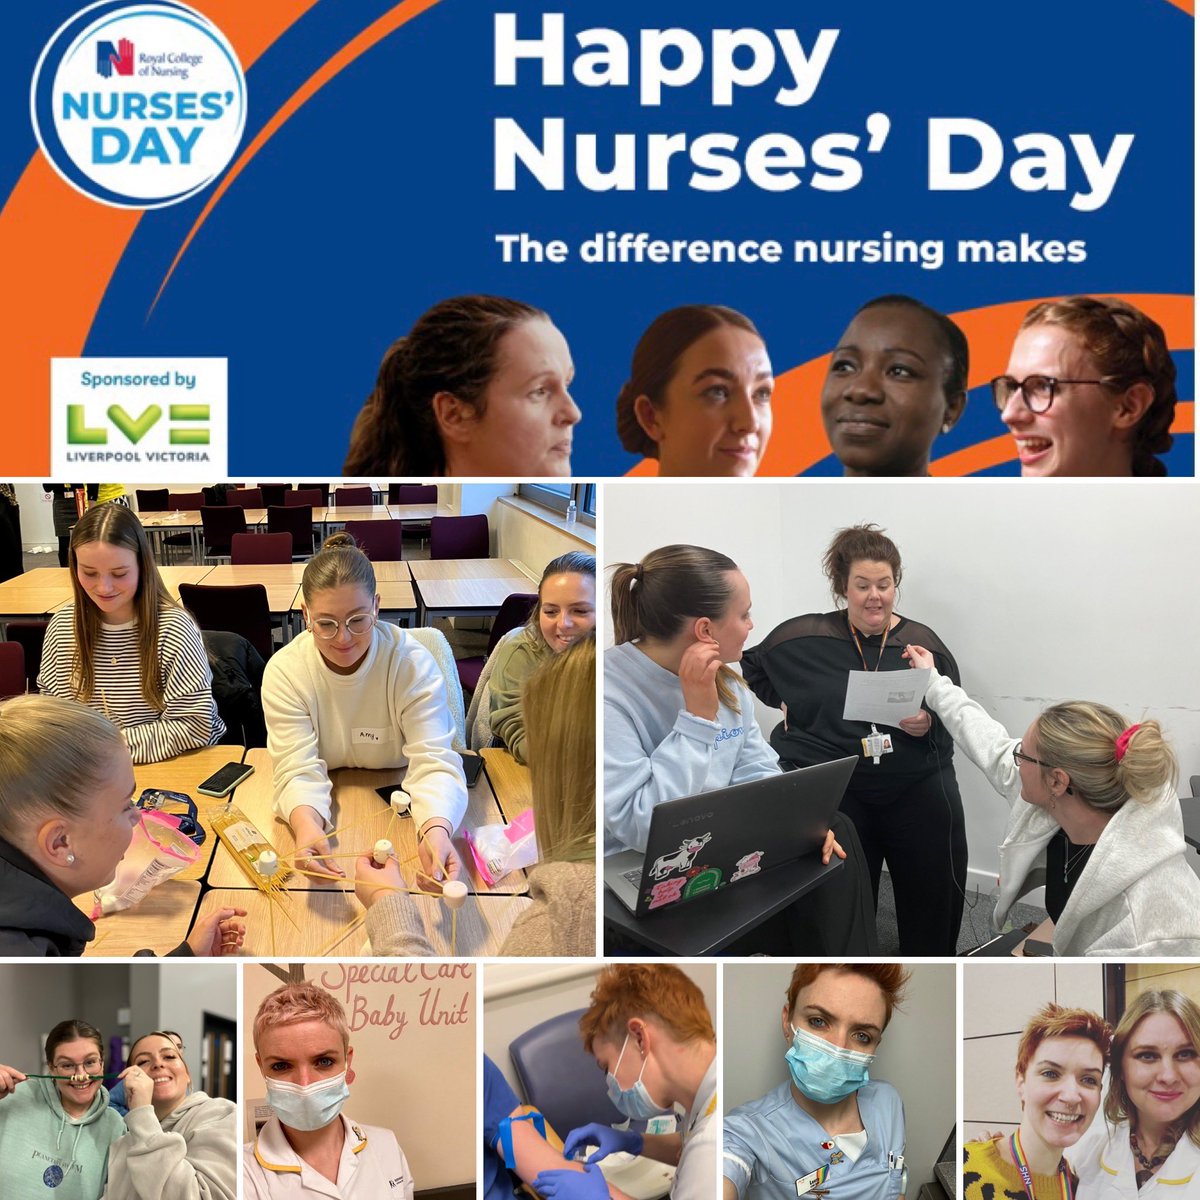 Happy nurses day to my incredible 09/20 peers, lecturers, practice assessors & supervisors. Thank you for getting me this far! @BCU_CYPnursing #studentnurse #3rdyear